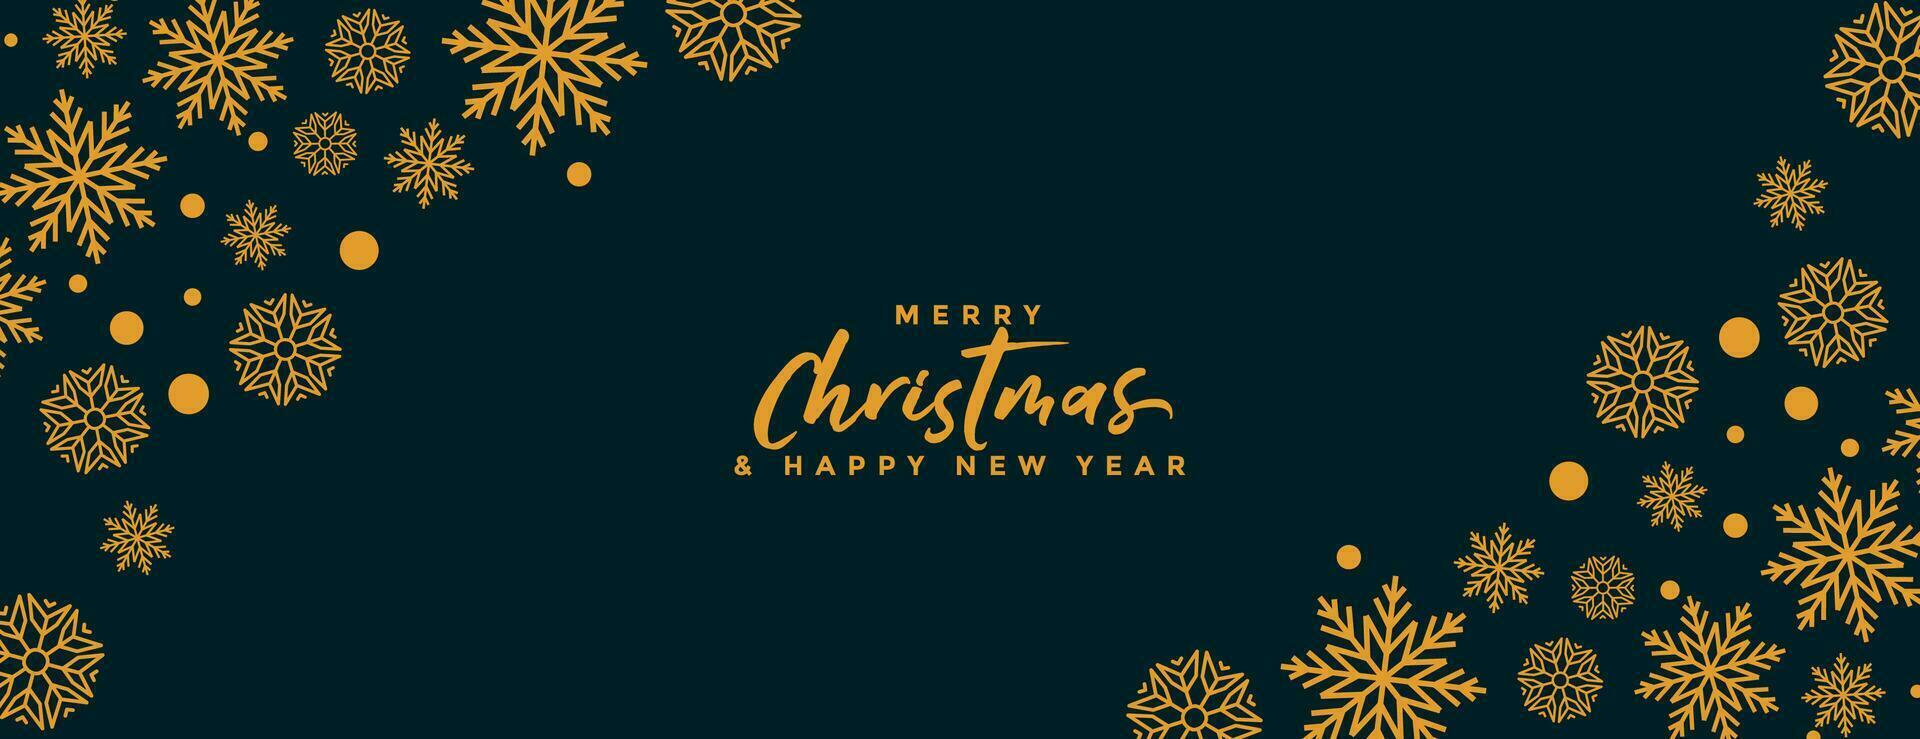 black and gold merry christmas snowflakes banner design vector